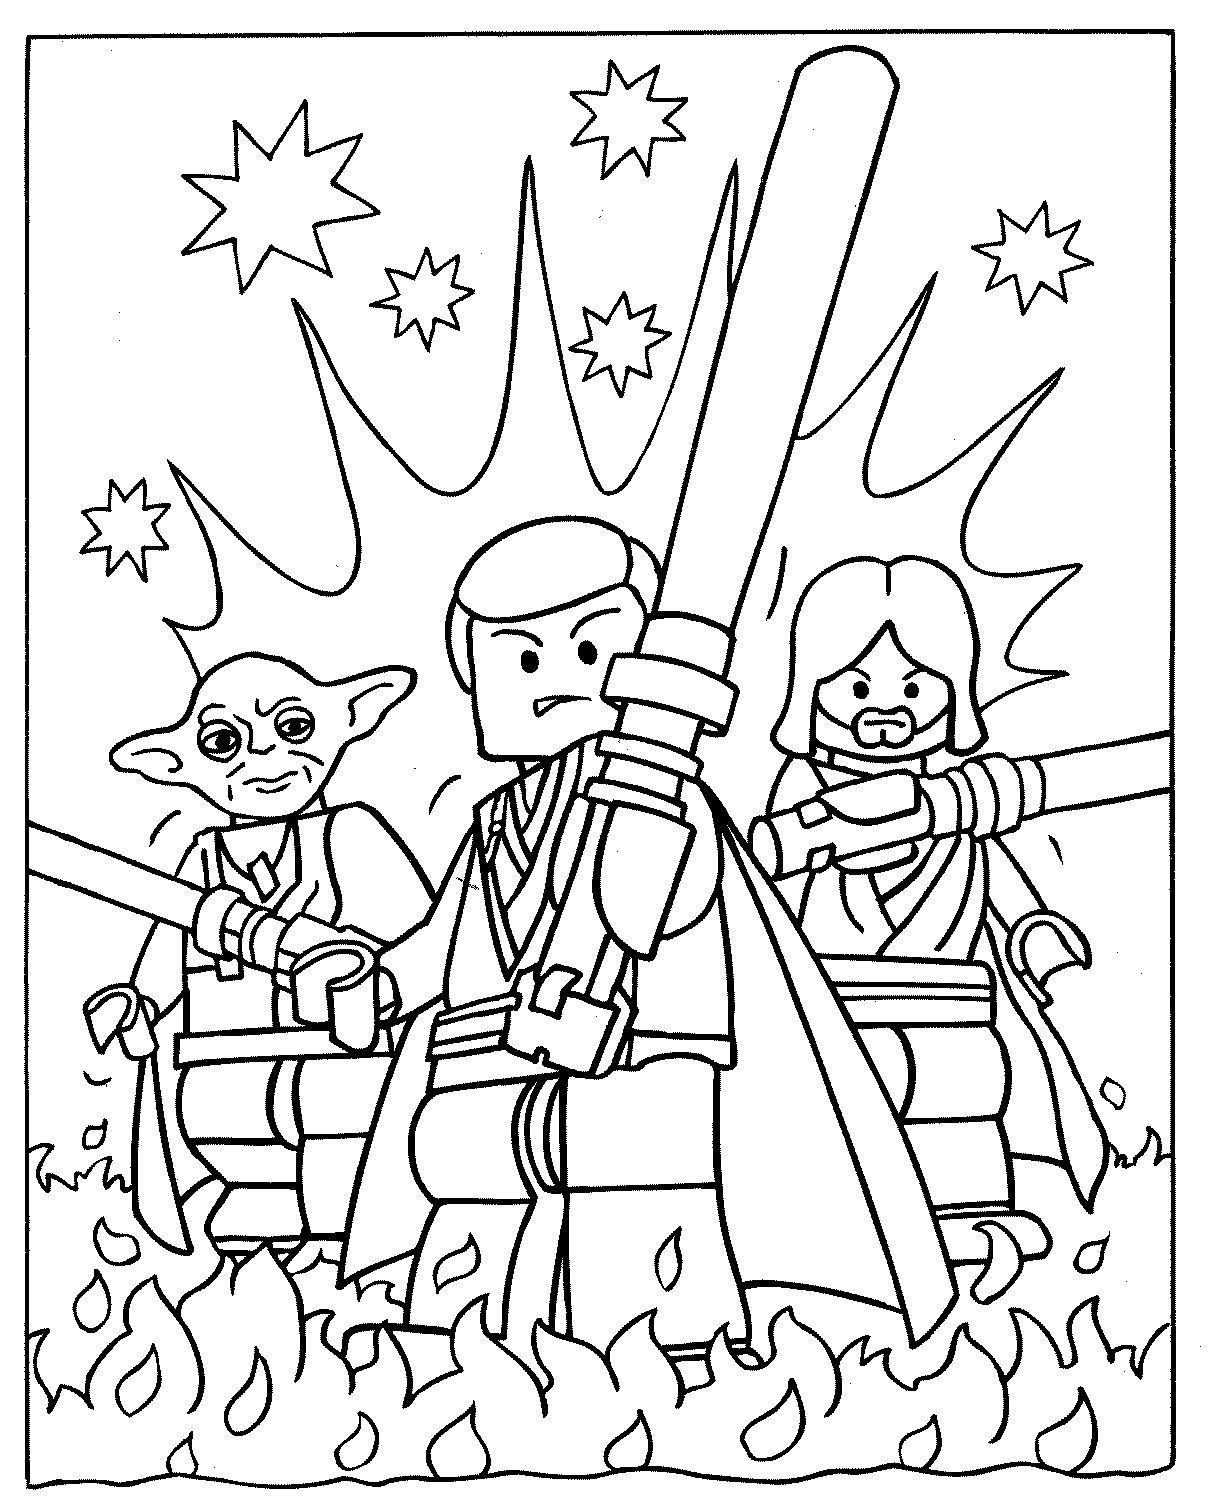 Coloring Ideas : Extraordinary Free Star Wars Coloring Pages Image - Free Printable Star Wars Coloring Pages